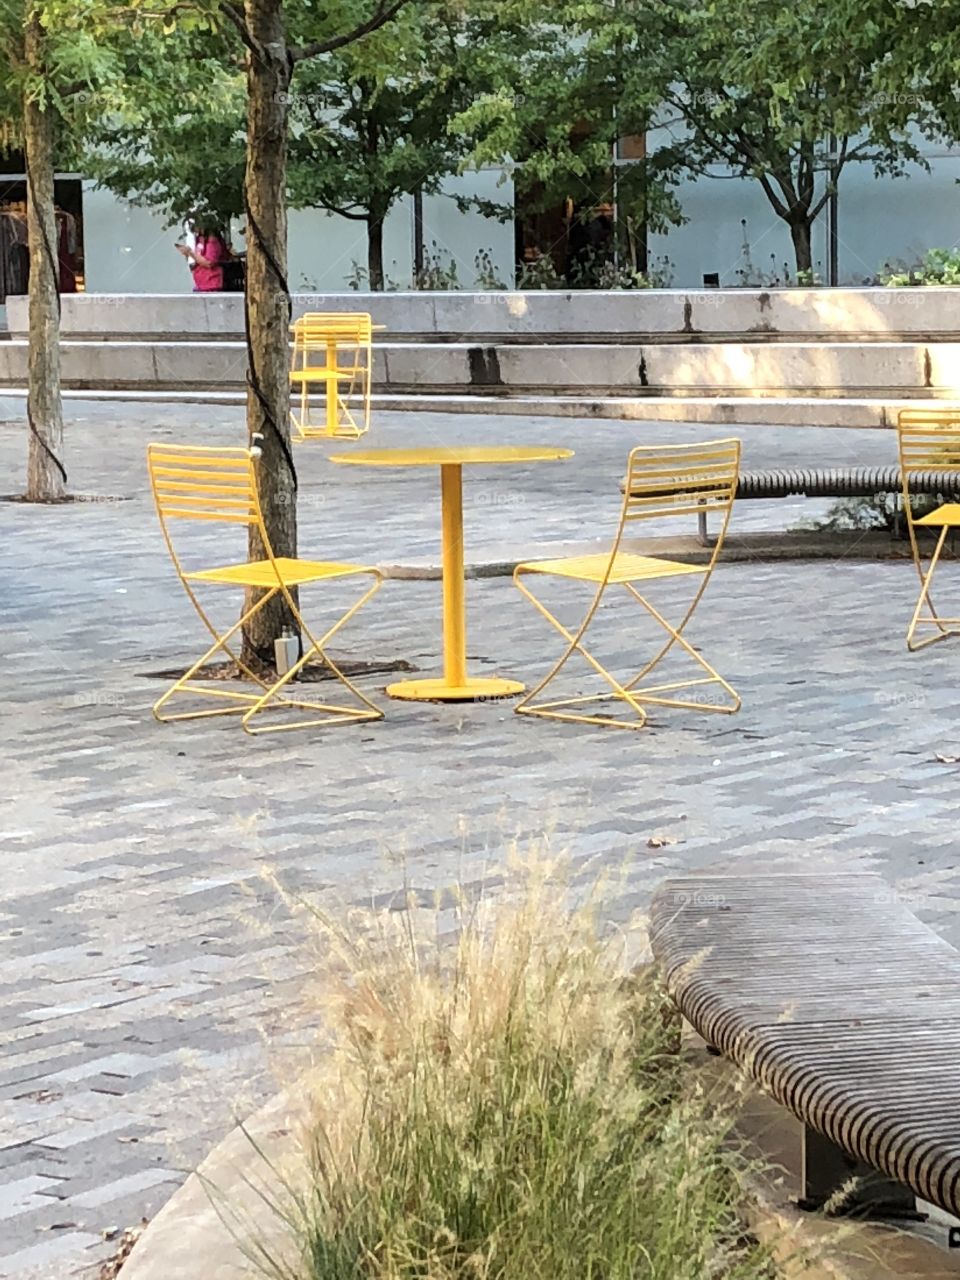 Yellow metal table and chairs outdoors on city plaza.